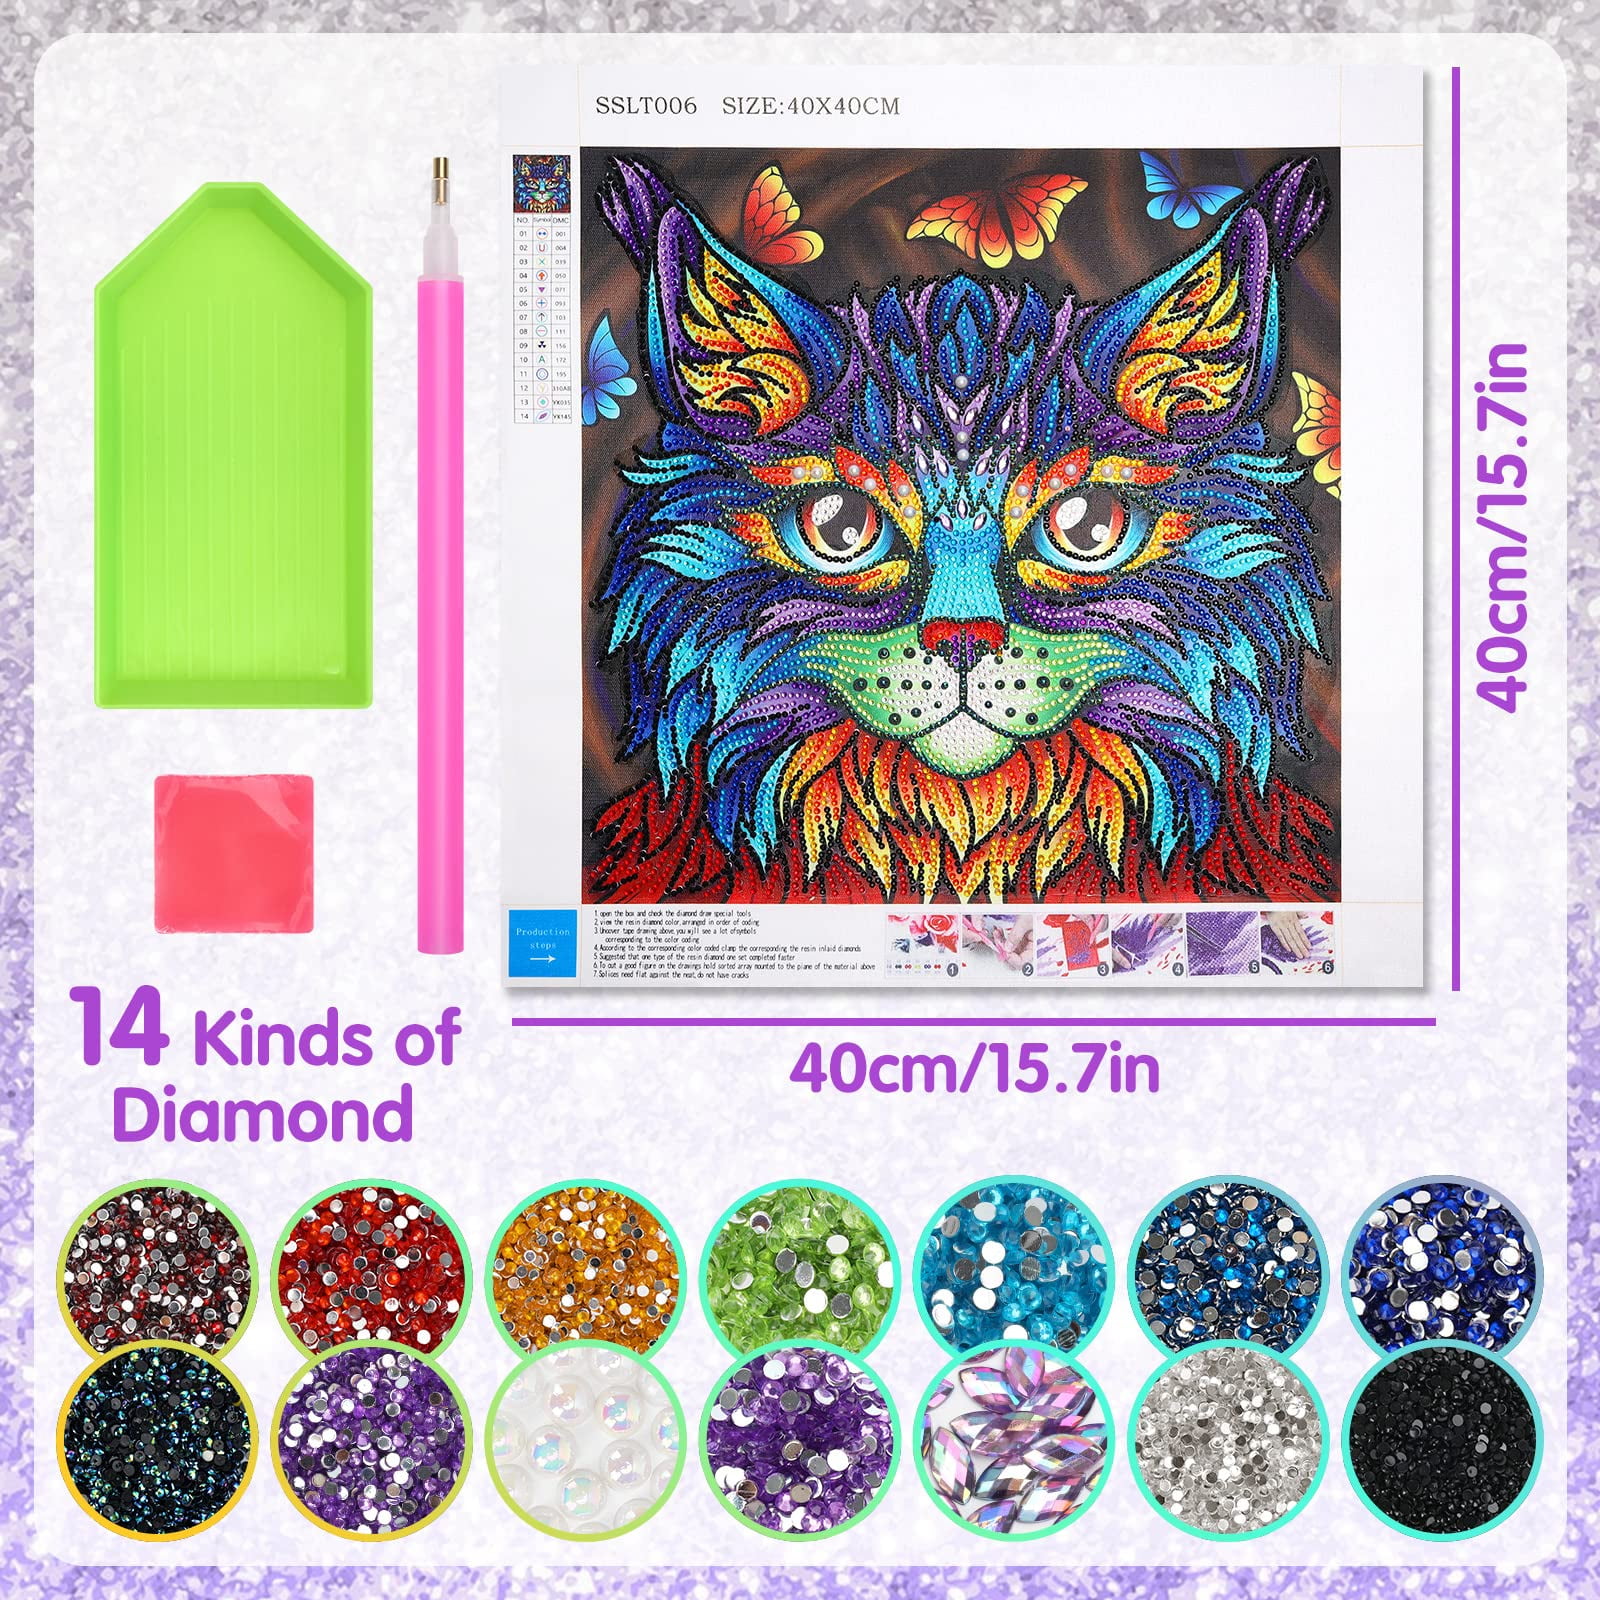 Girl Toys Age 9 10 11 12, 40 * 40 Cm Diamond Painting Kits Gifts for 9-15  Year Olds Girls Teenage, 5d Diamond Art Kits Presents for 8 9 10 11 12 Year  Old Girls Kids Children Birthday Easter Present 